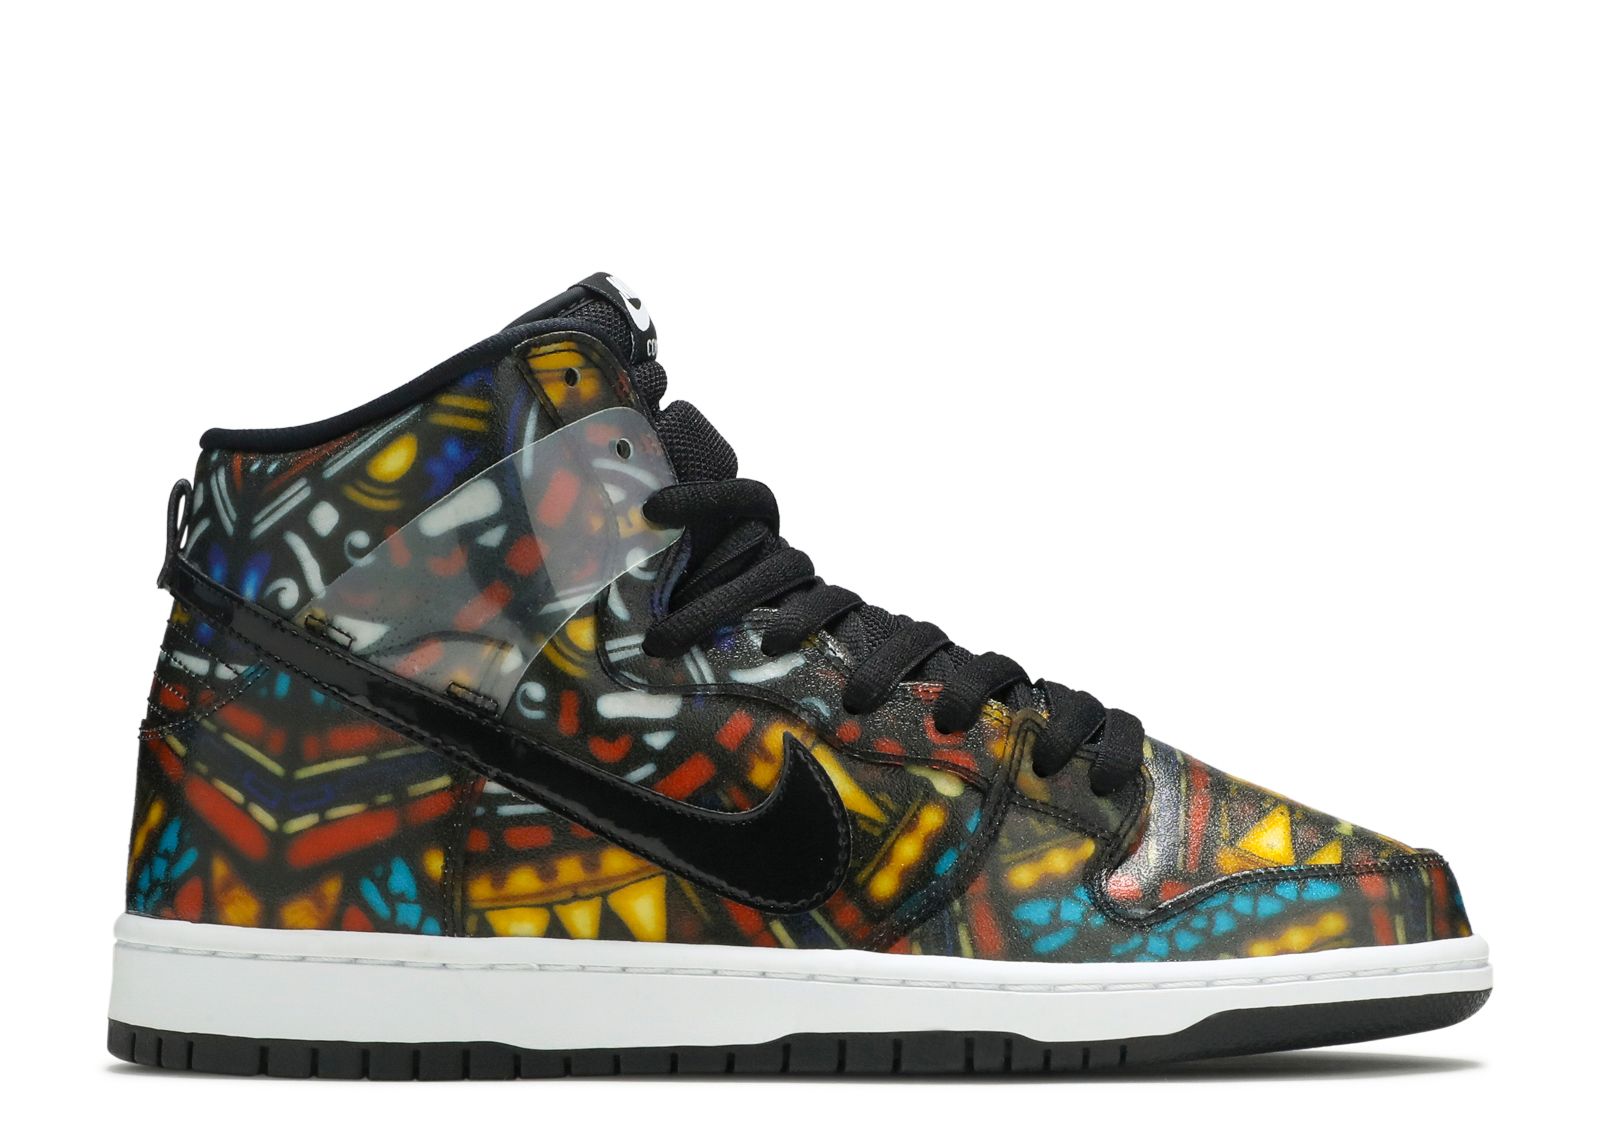 Кроссовки Nike Concepts X Sb Dunk High 'Stained Glass' Special Box, разноцветный 15mm stained glass cube prism cross dichroic mirror combiner splitter decor transparent module optical glass class toy